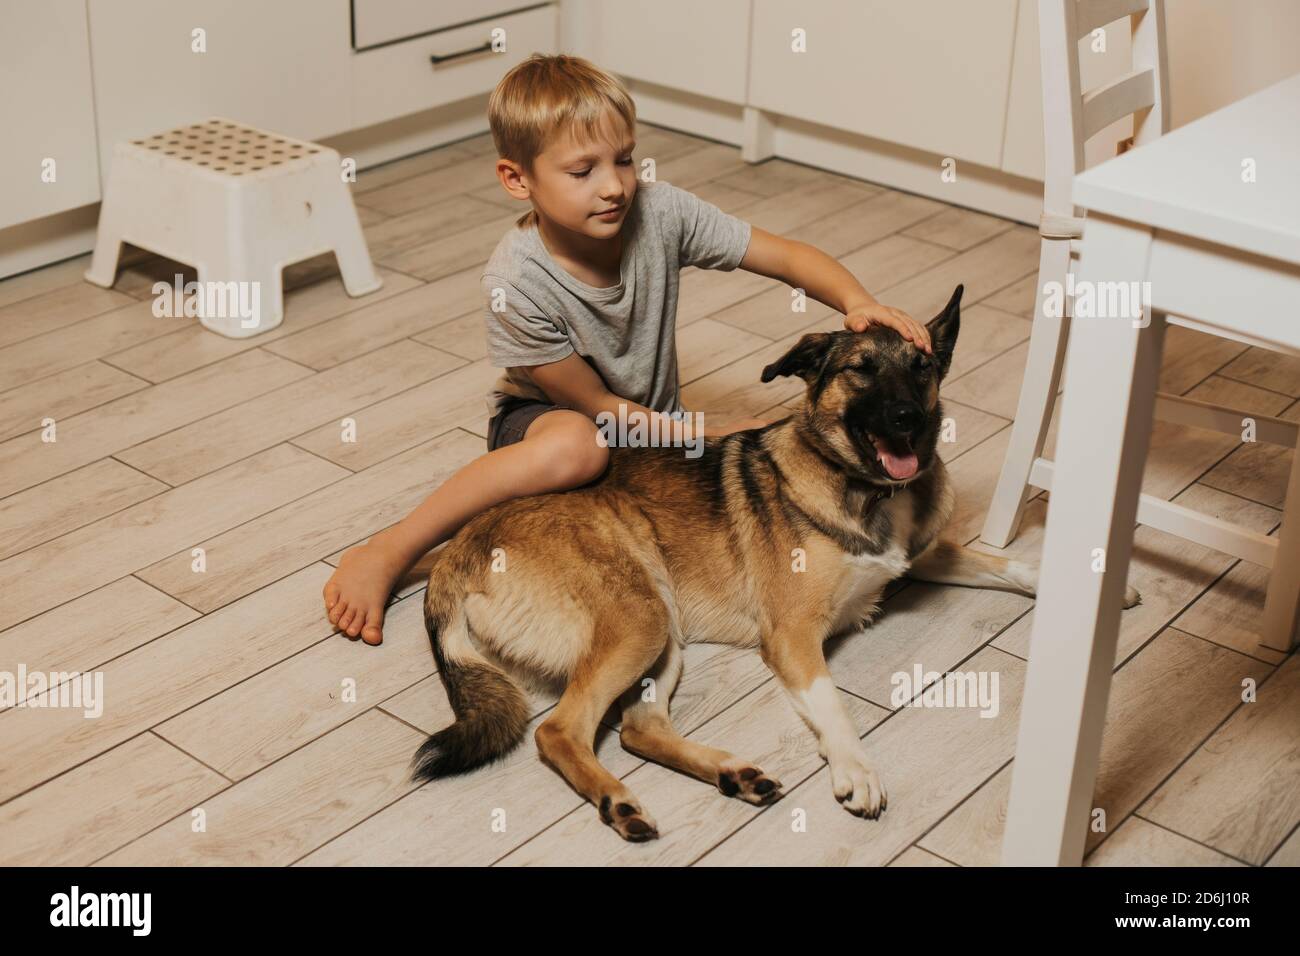 A seven year old boy is stroking his dog at home on the floor. Warm light. Blonde child and pet Stock Photo